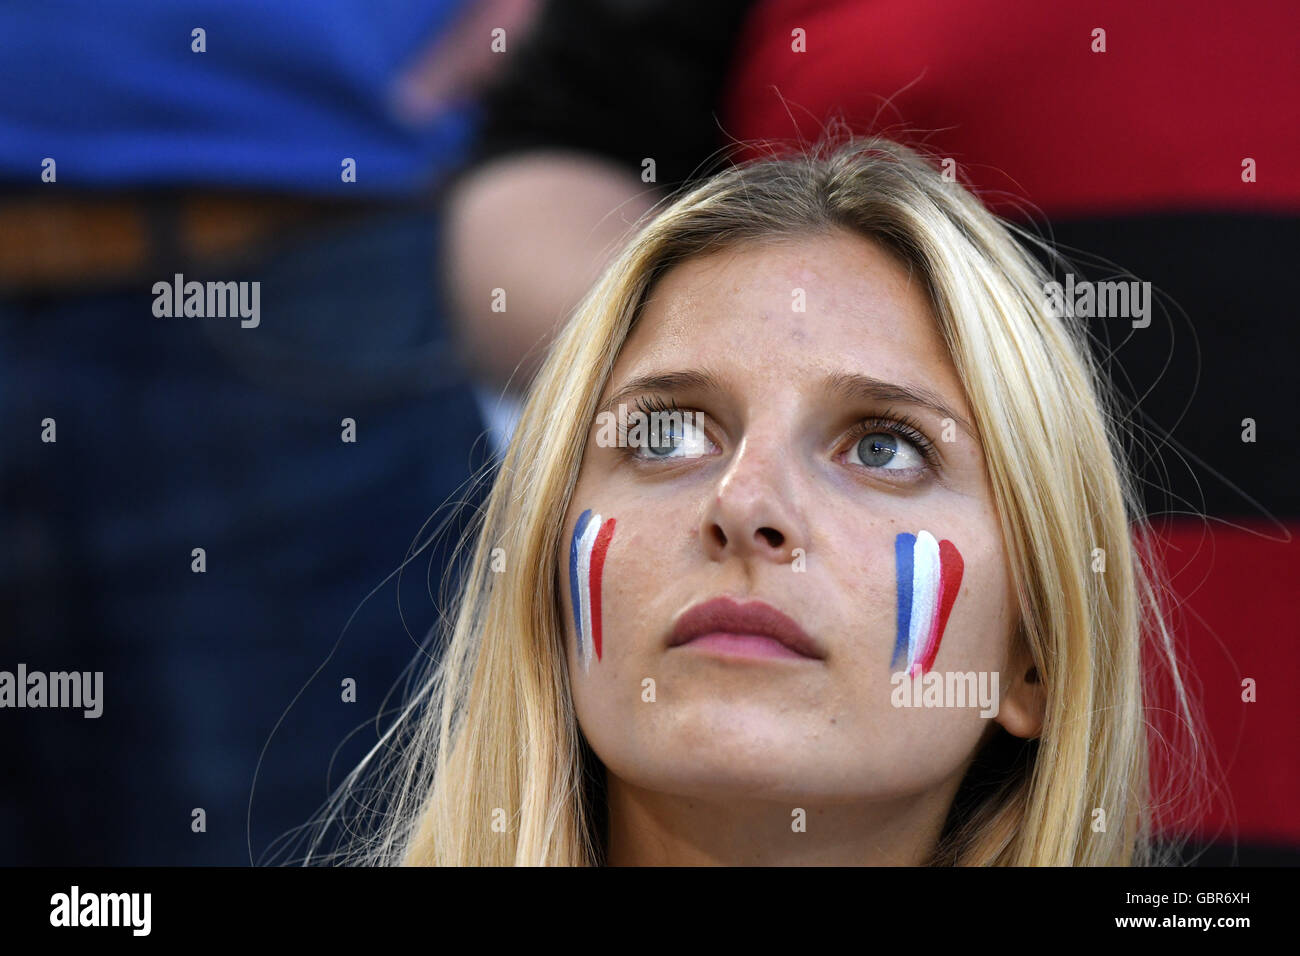 Supporters (France) ; July 07, 2016 - Football : Uefa Euro France 2016, Semifinal, Germany 0-2 France at Stade Velodrome, Marseille, France. © aicfoto/AFLO/Alamy Live News Stock Photo